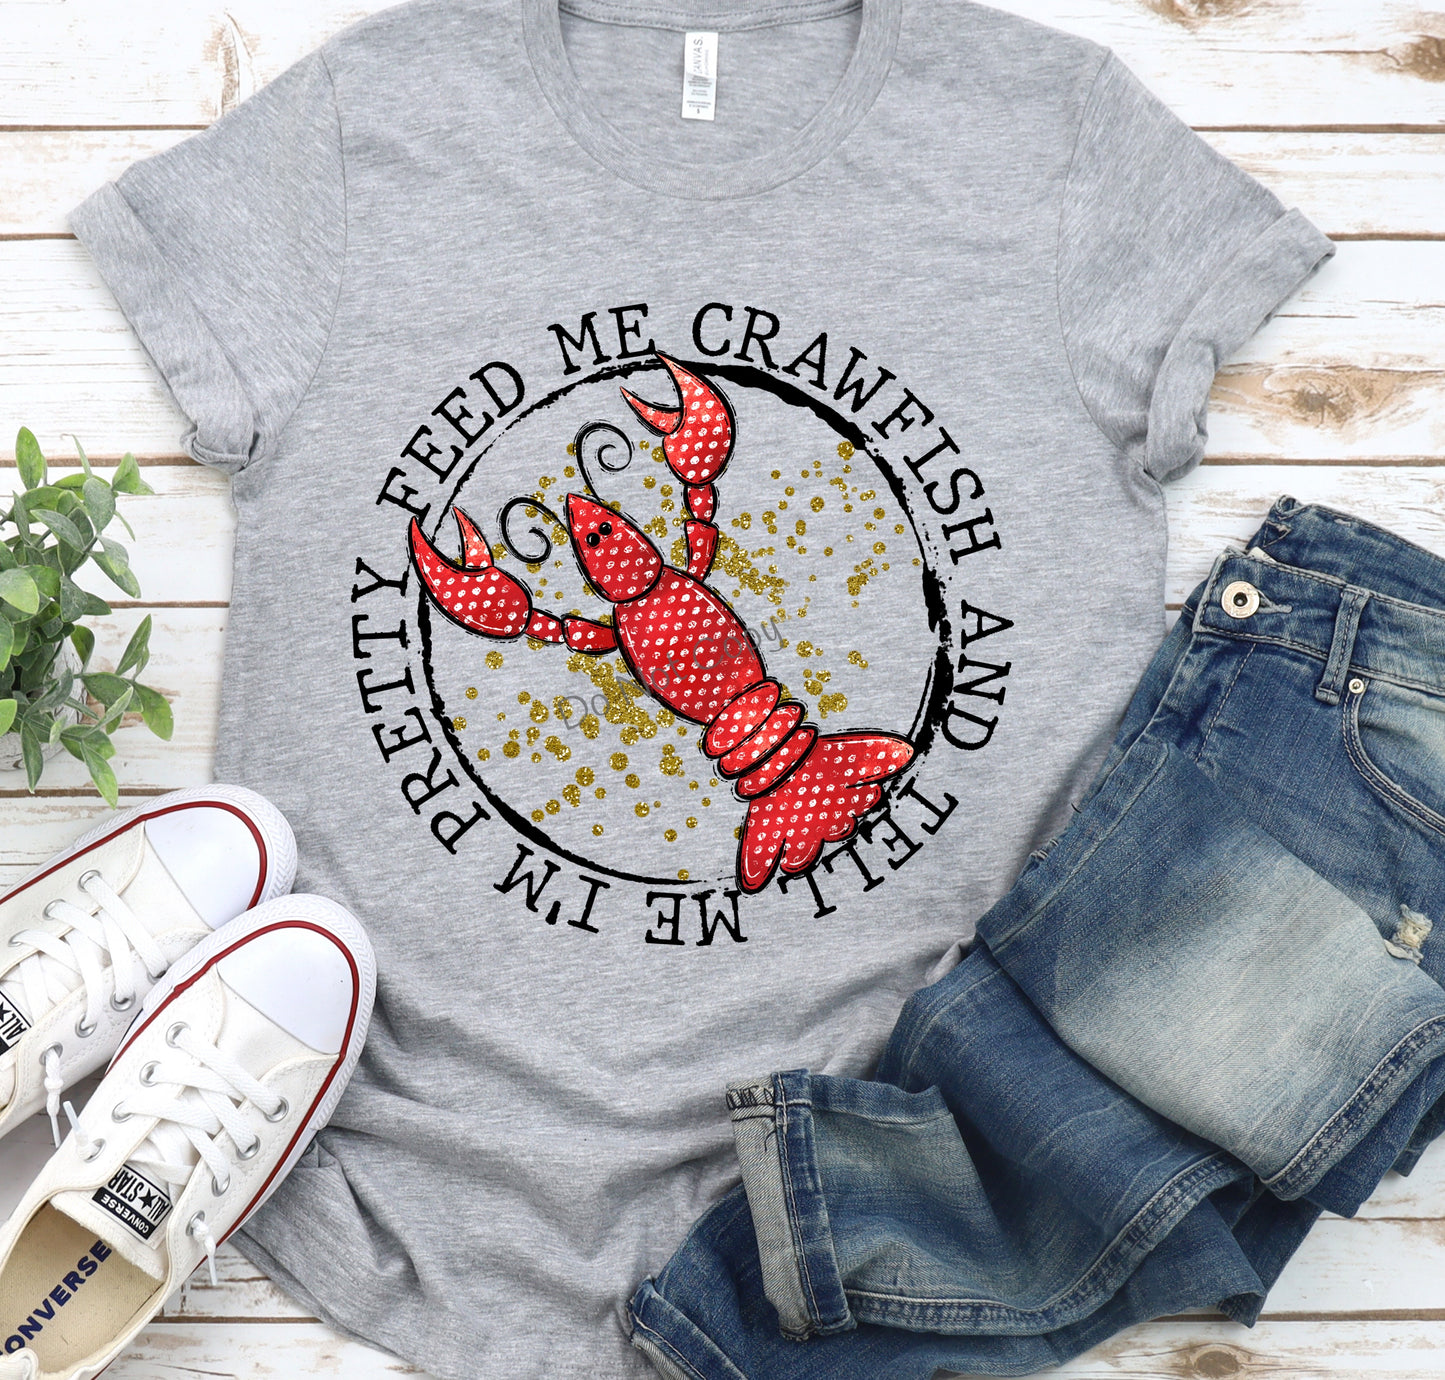 Feed me crawfish and tell me I’m pretty-DTF